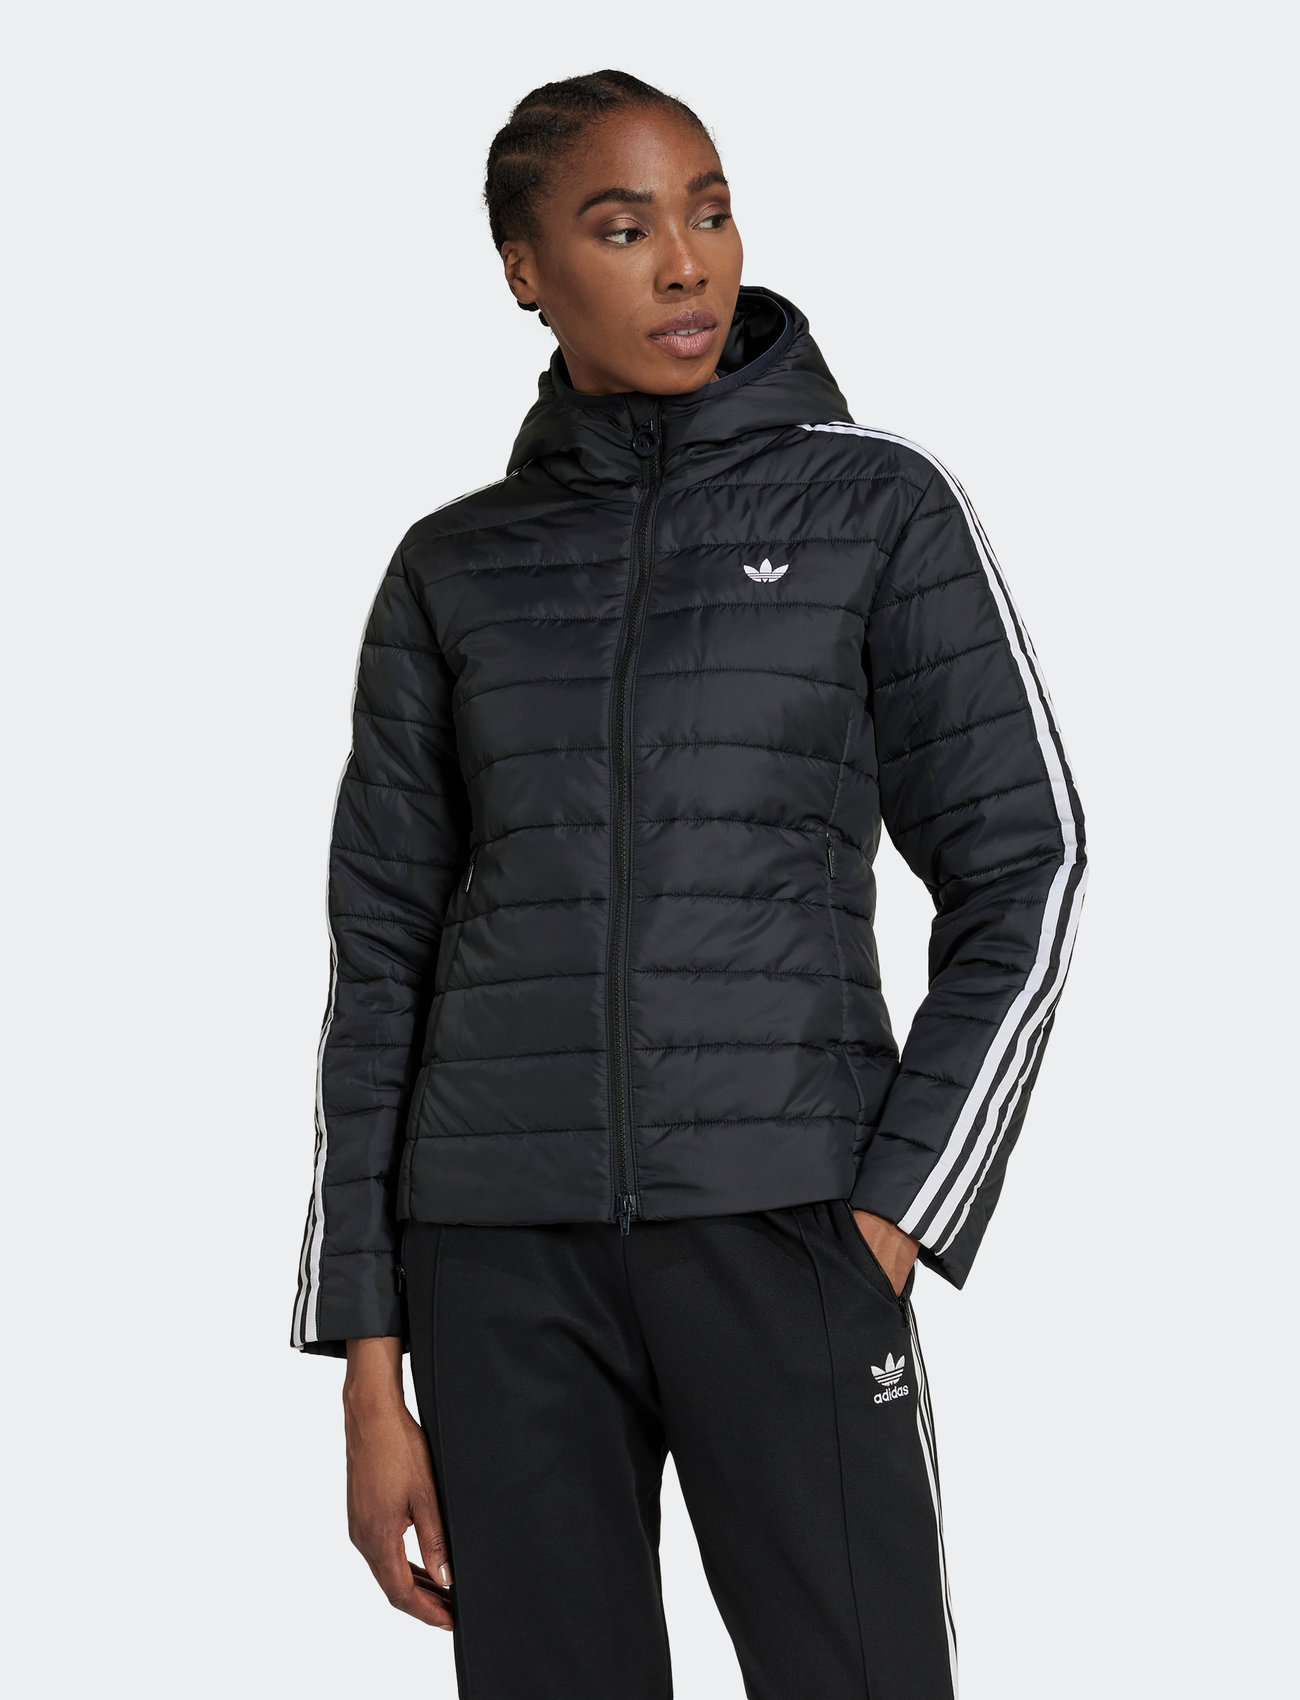 adidas Originals Slim Jacket - 100 €. Buy Down- & padded jackets from adidas Originals online at Boozt.com. Fast delivery and returns